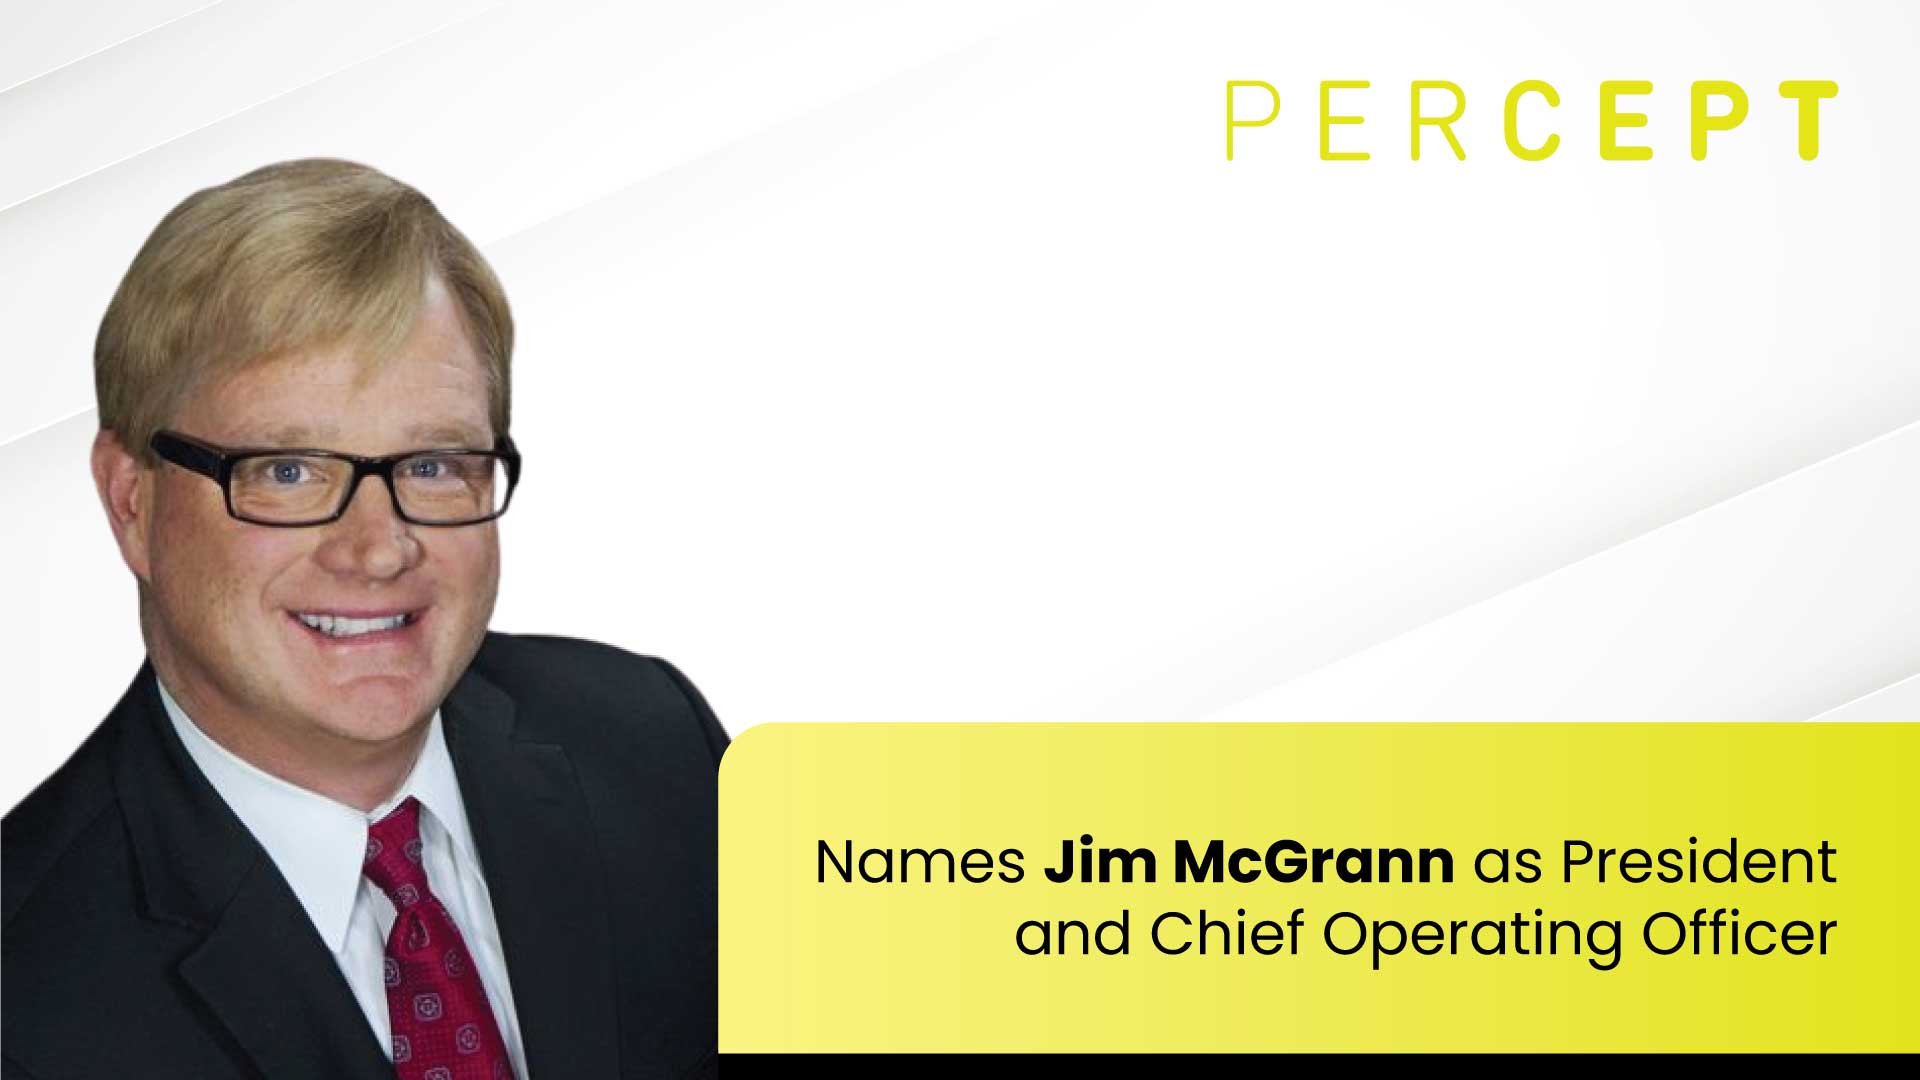 Percept Corporation Names Vision Industry Leader Jim McGrann as President and Chief Operating Officer